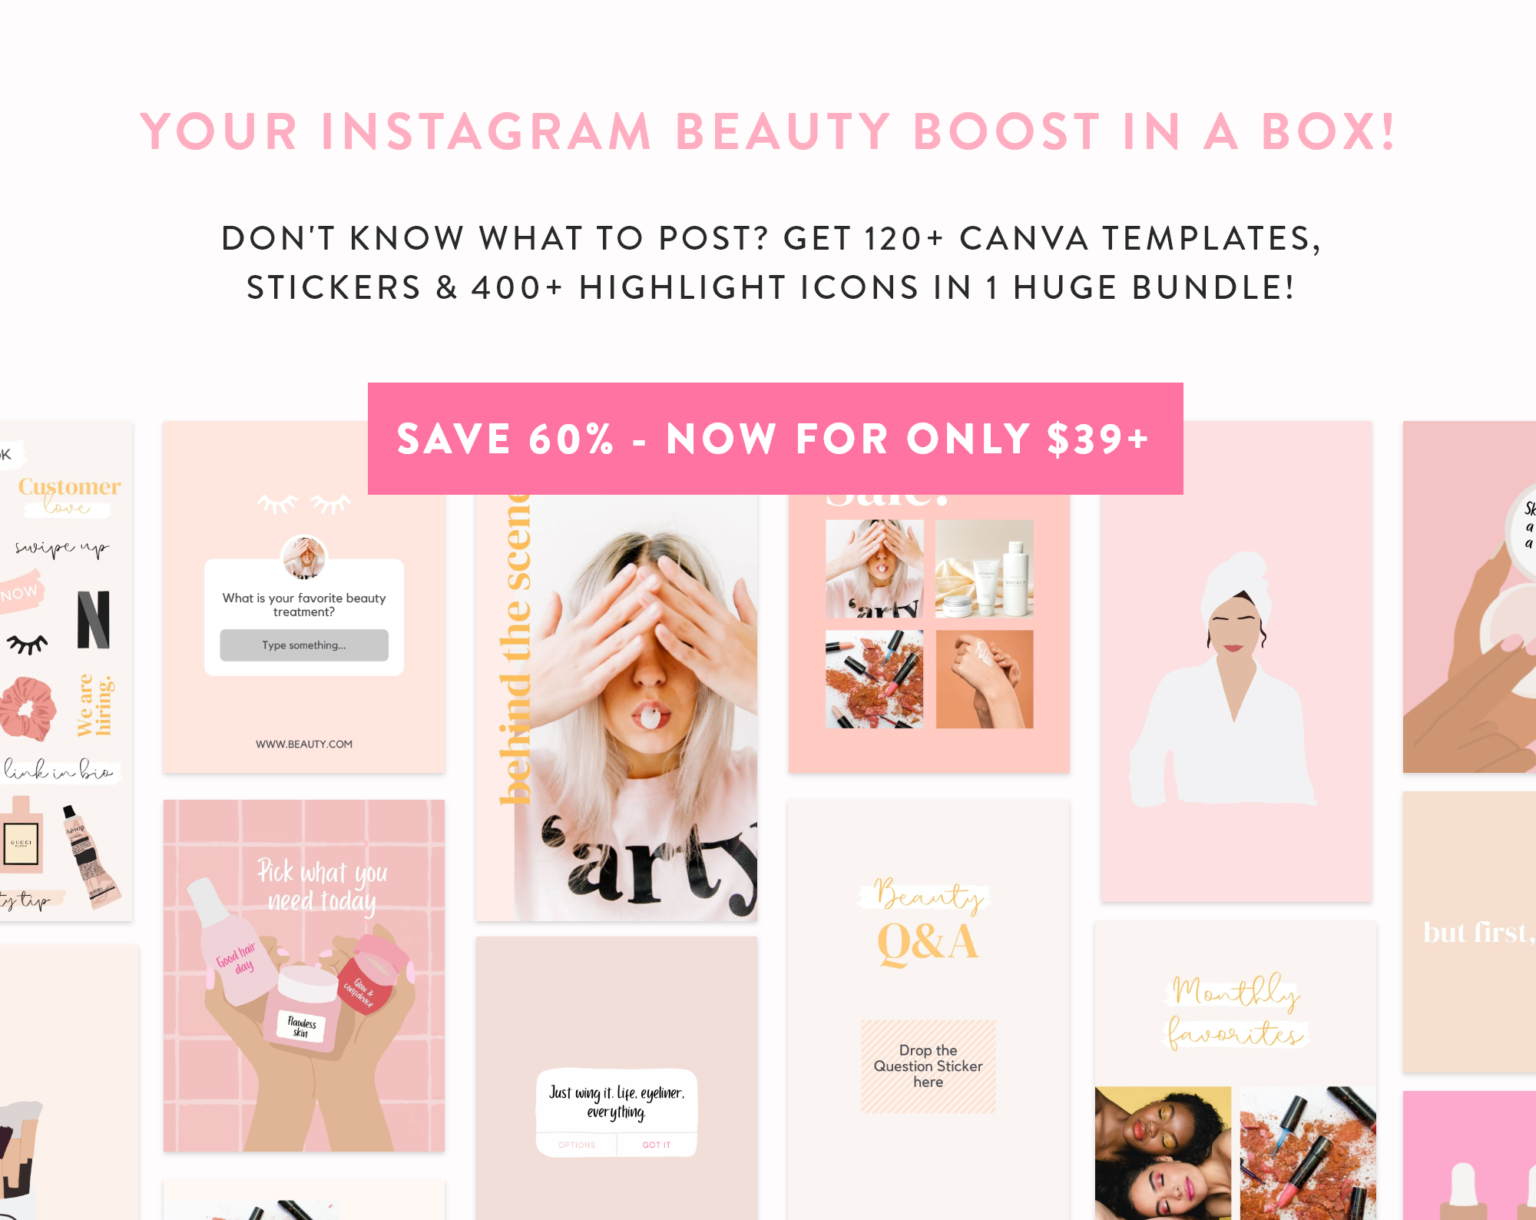 beauty-boost-Instagram-bündle-for-canva-templates-in-a-box